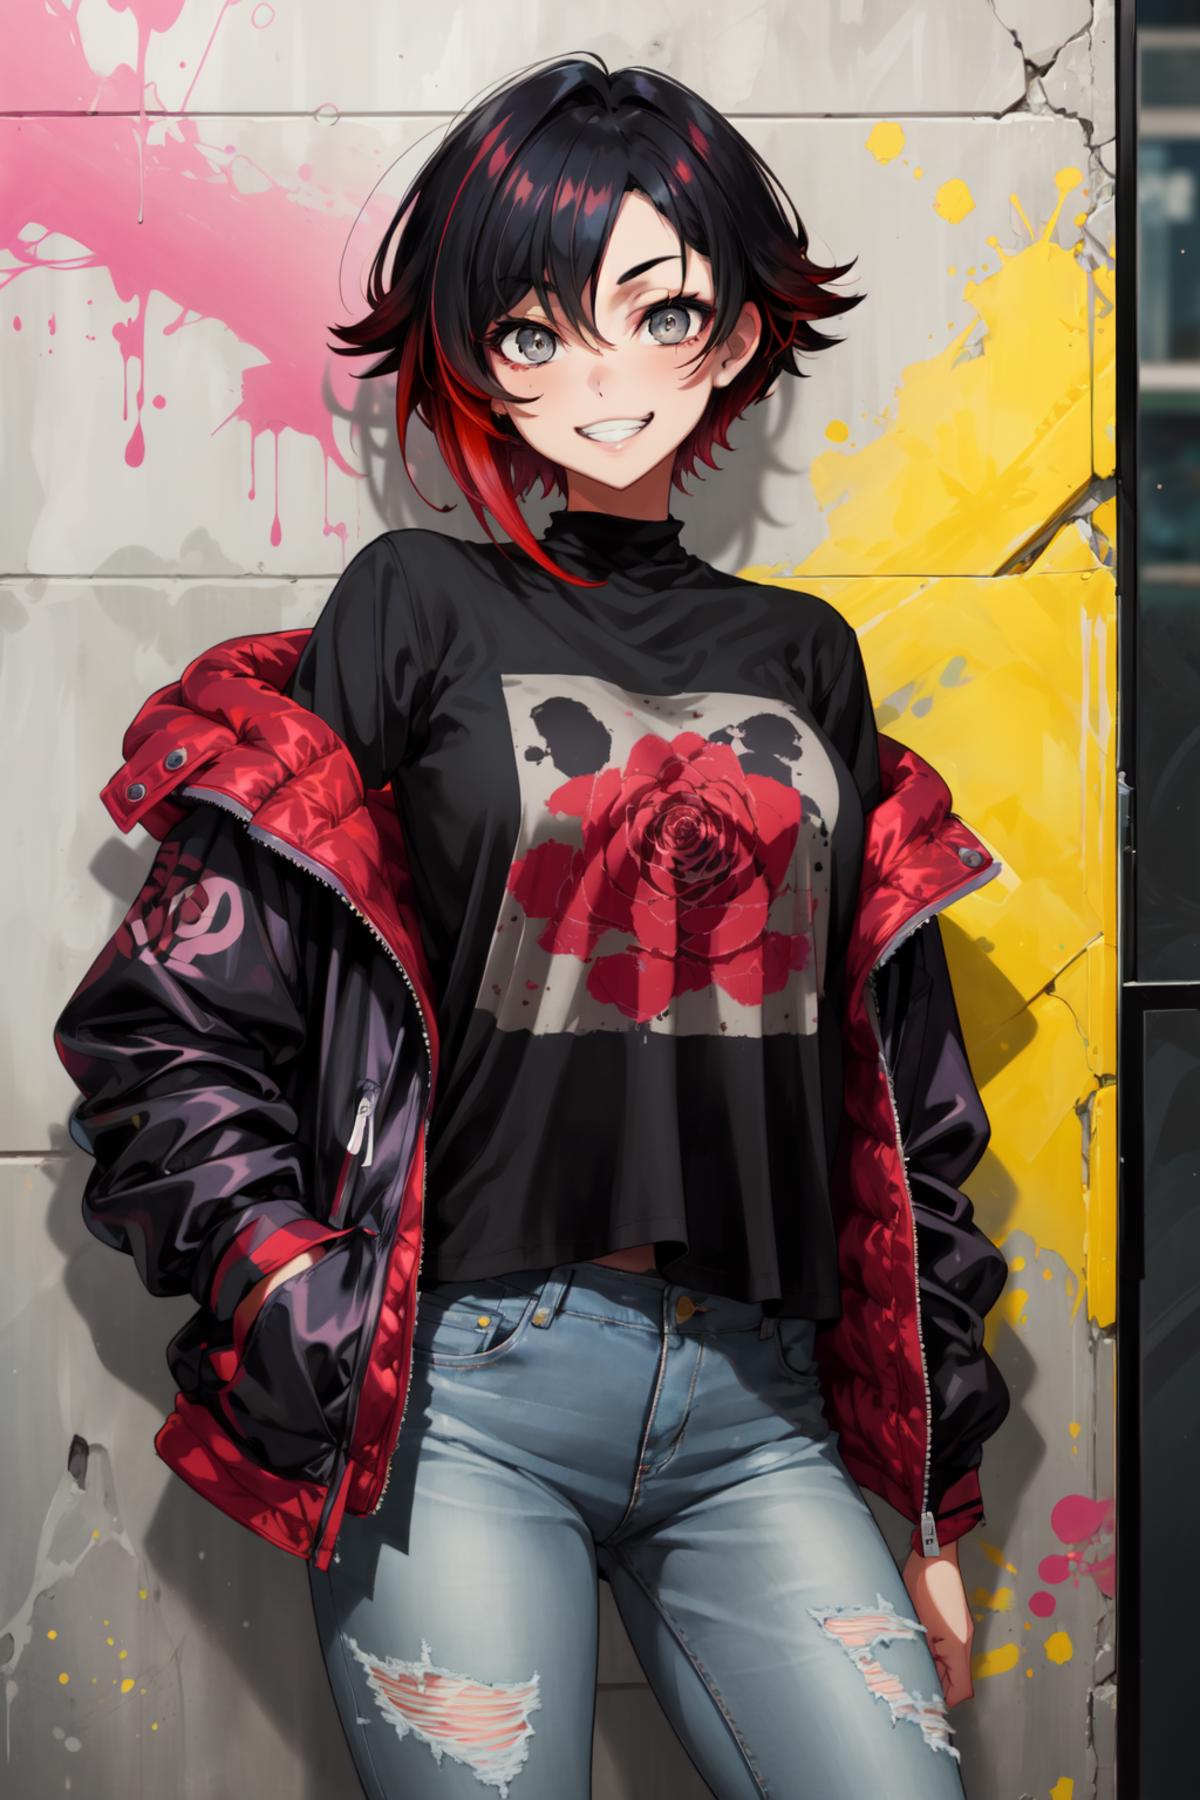 Ruby Rose | RWBY image by UnknownNo3